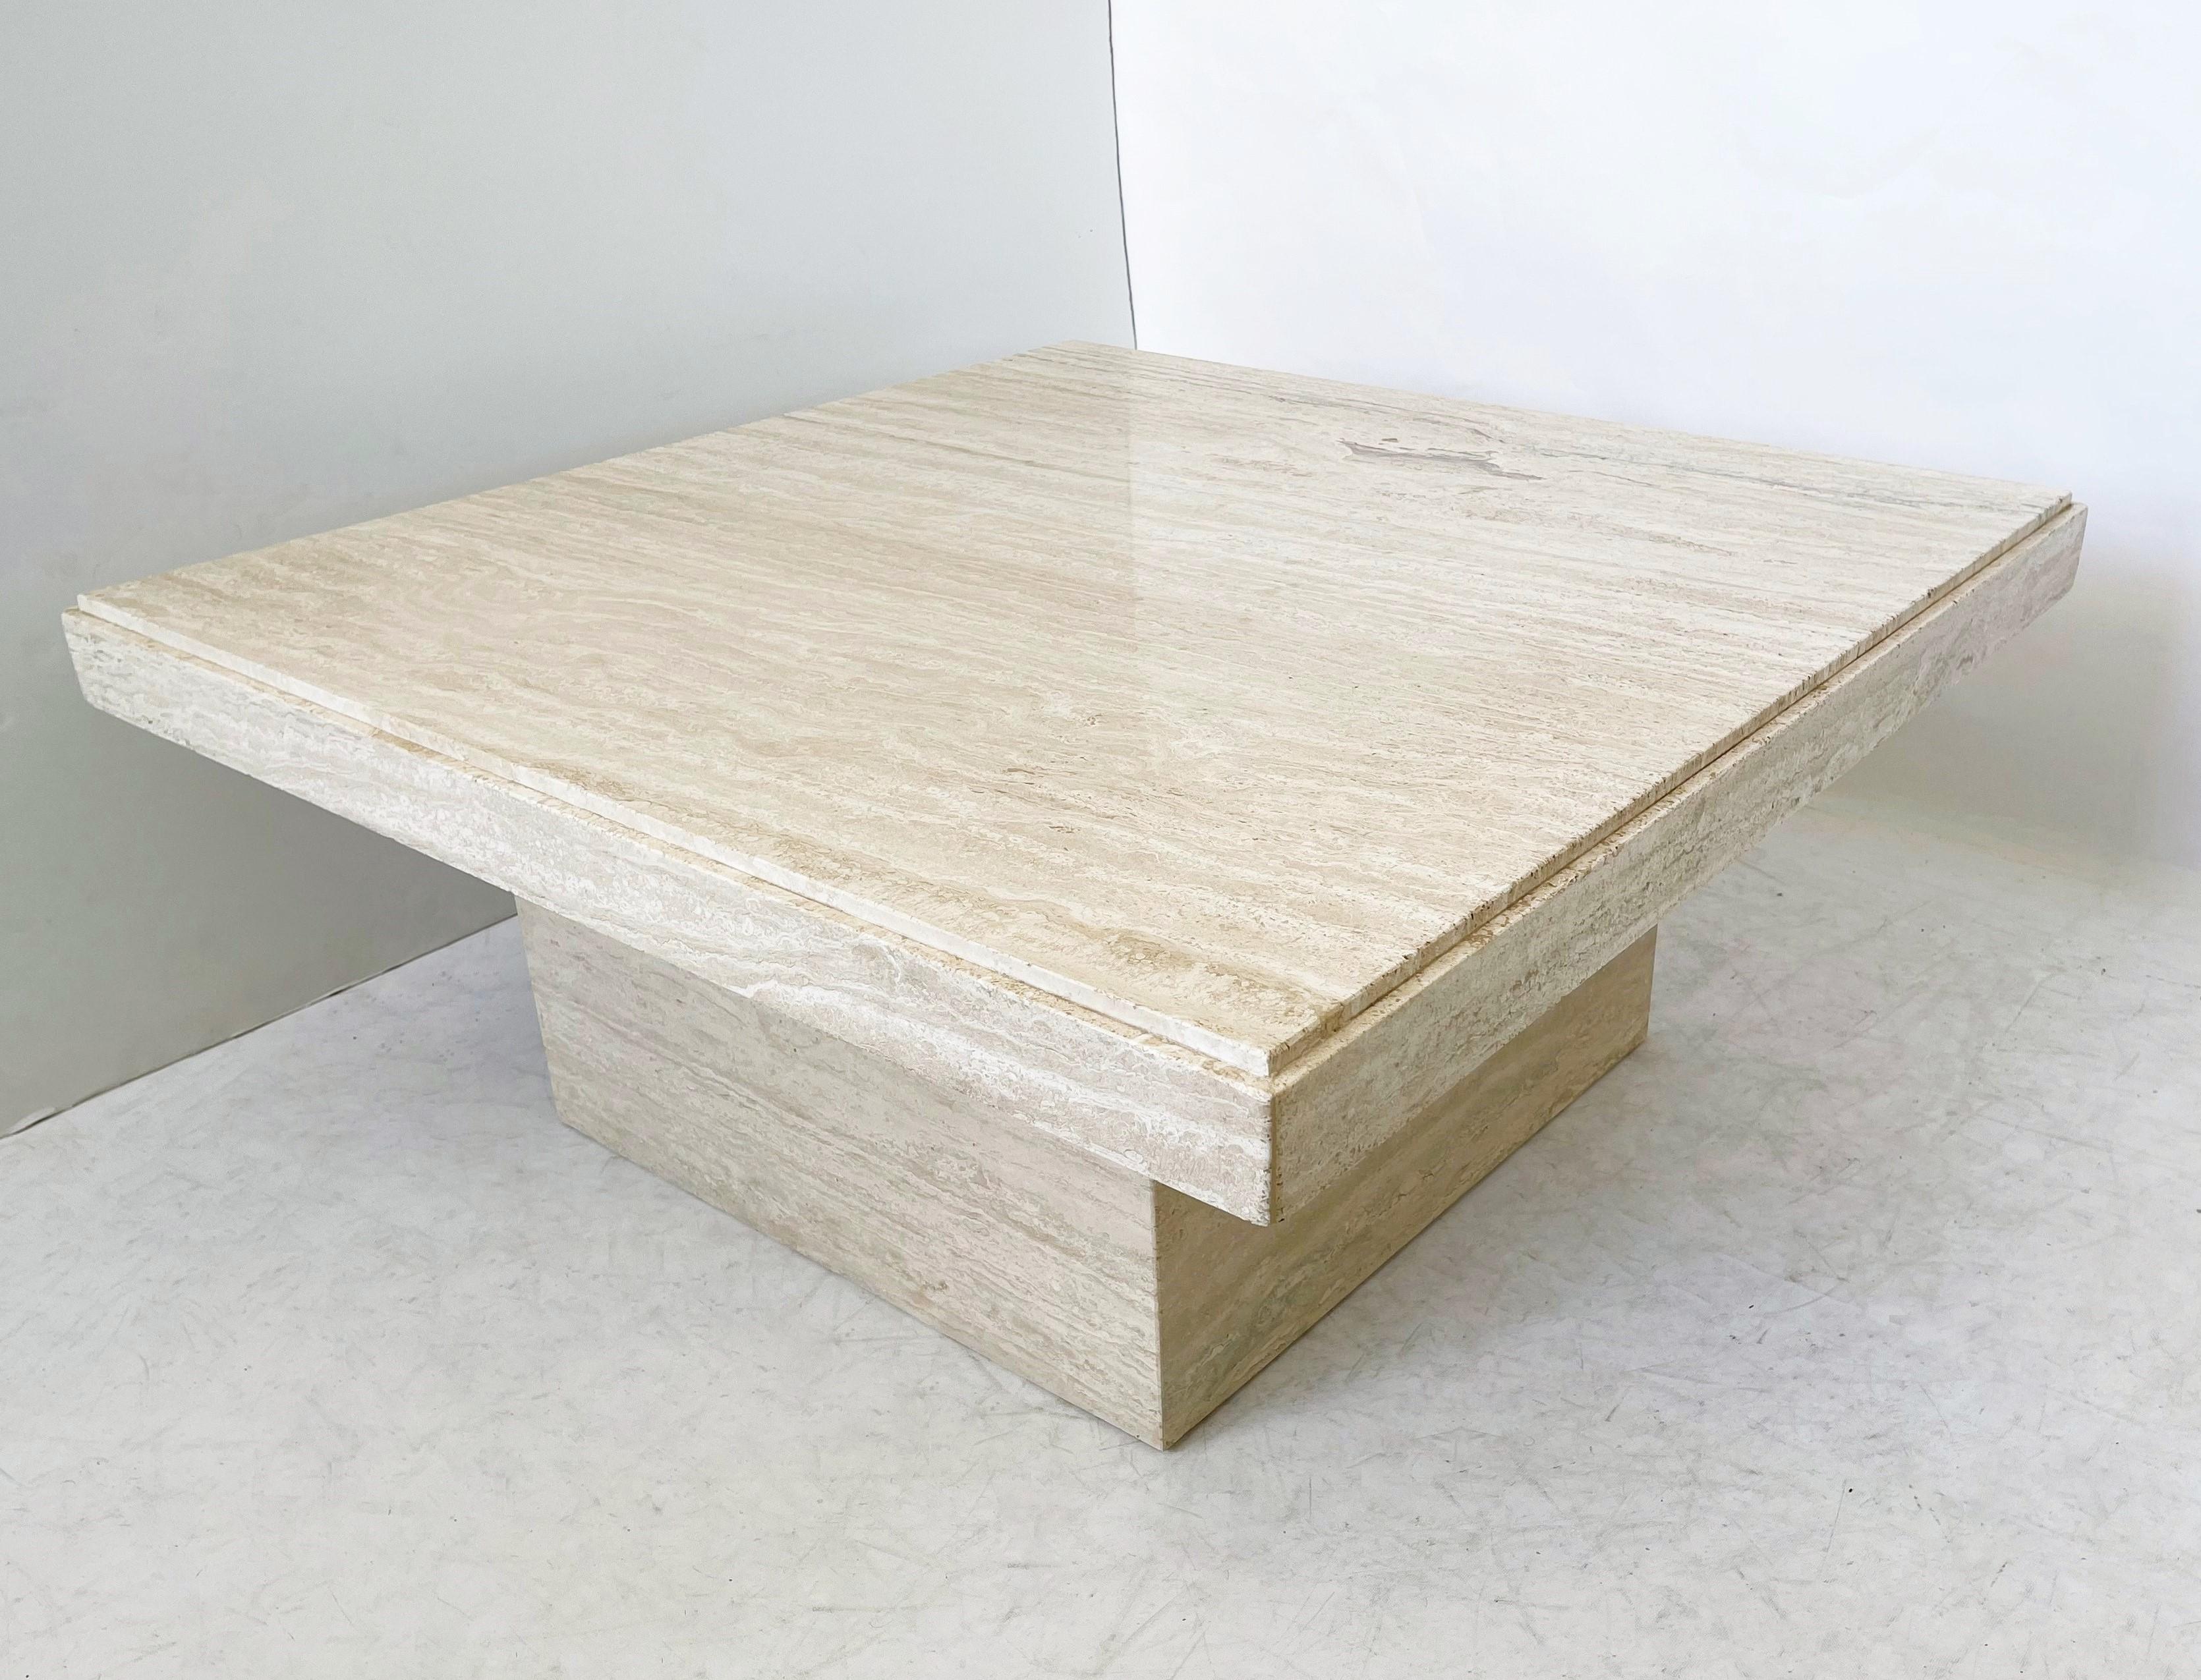 Pure Minimalist Italian modern travertine marble low/cocktail table in the manner of Angelo Mangiarotti, circa 1970. With gorgeous veining polished travertine square table top with beveled edge supported on a center square pedestal base. This piece